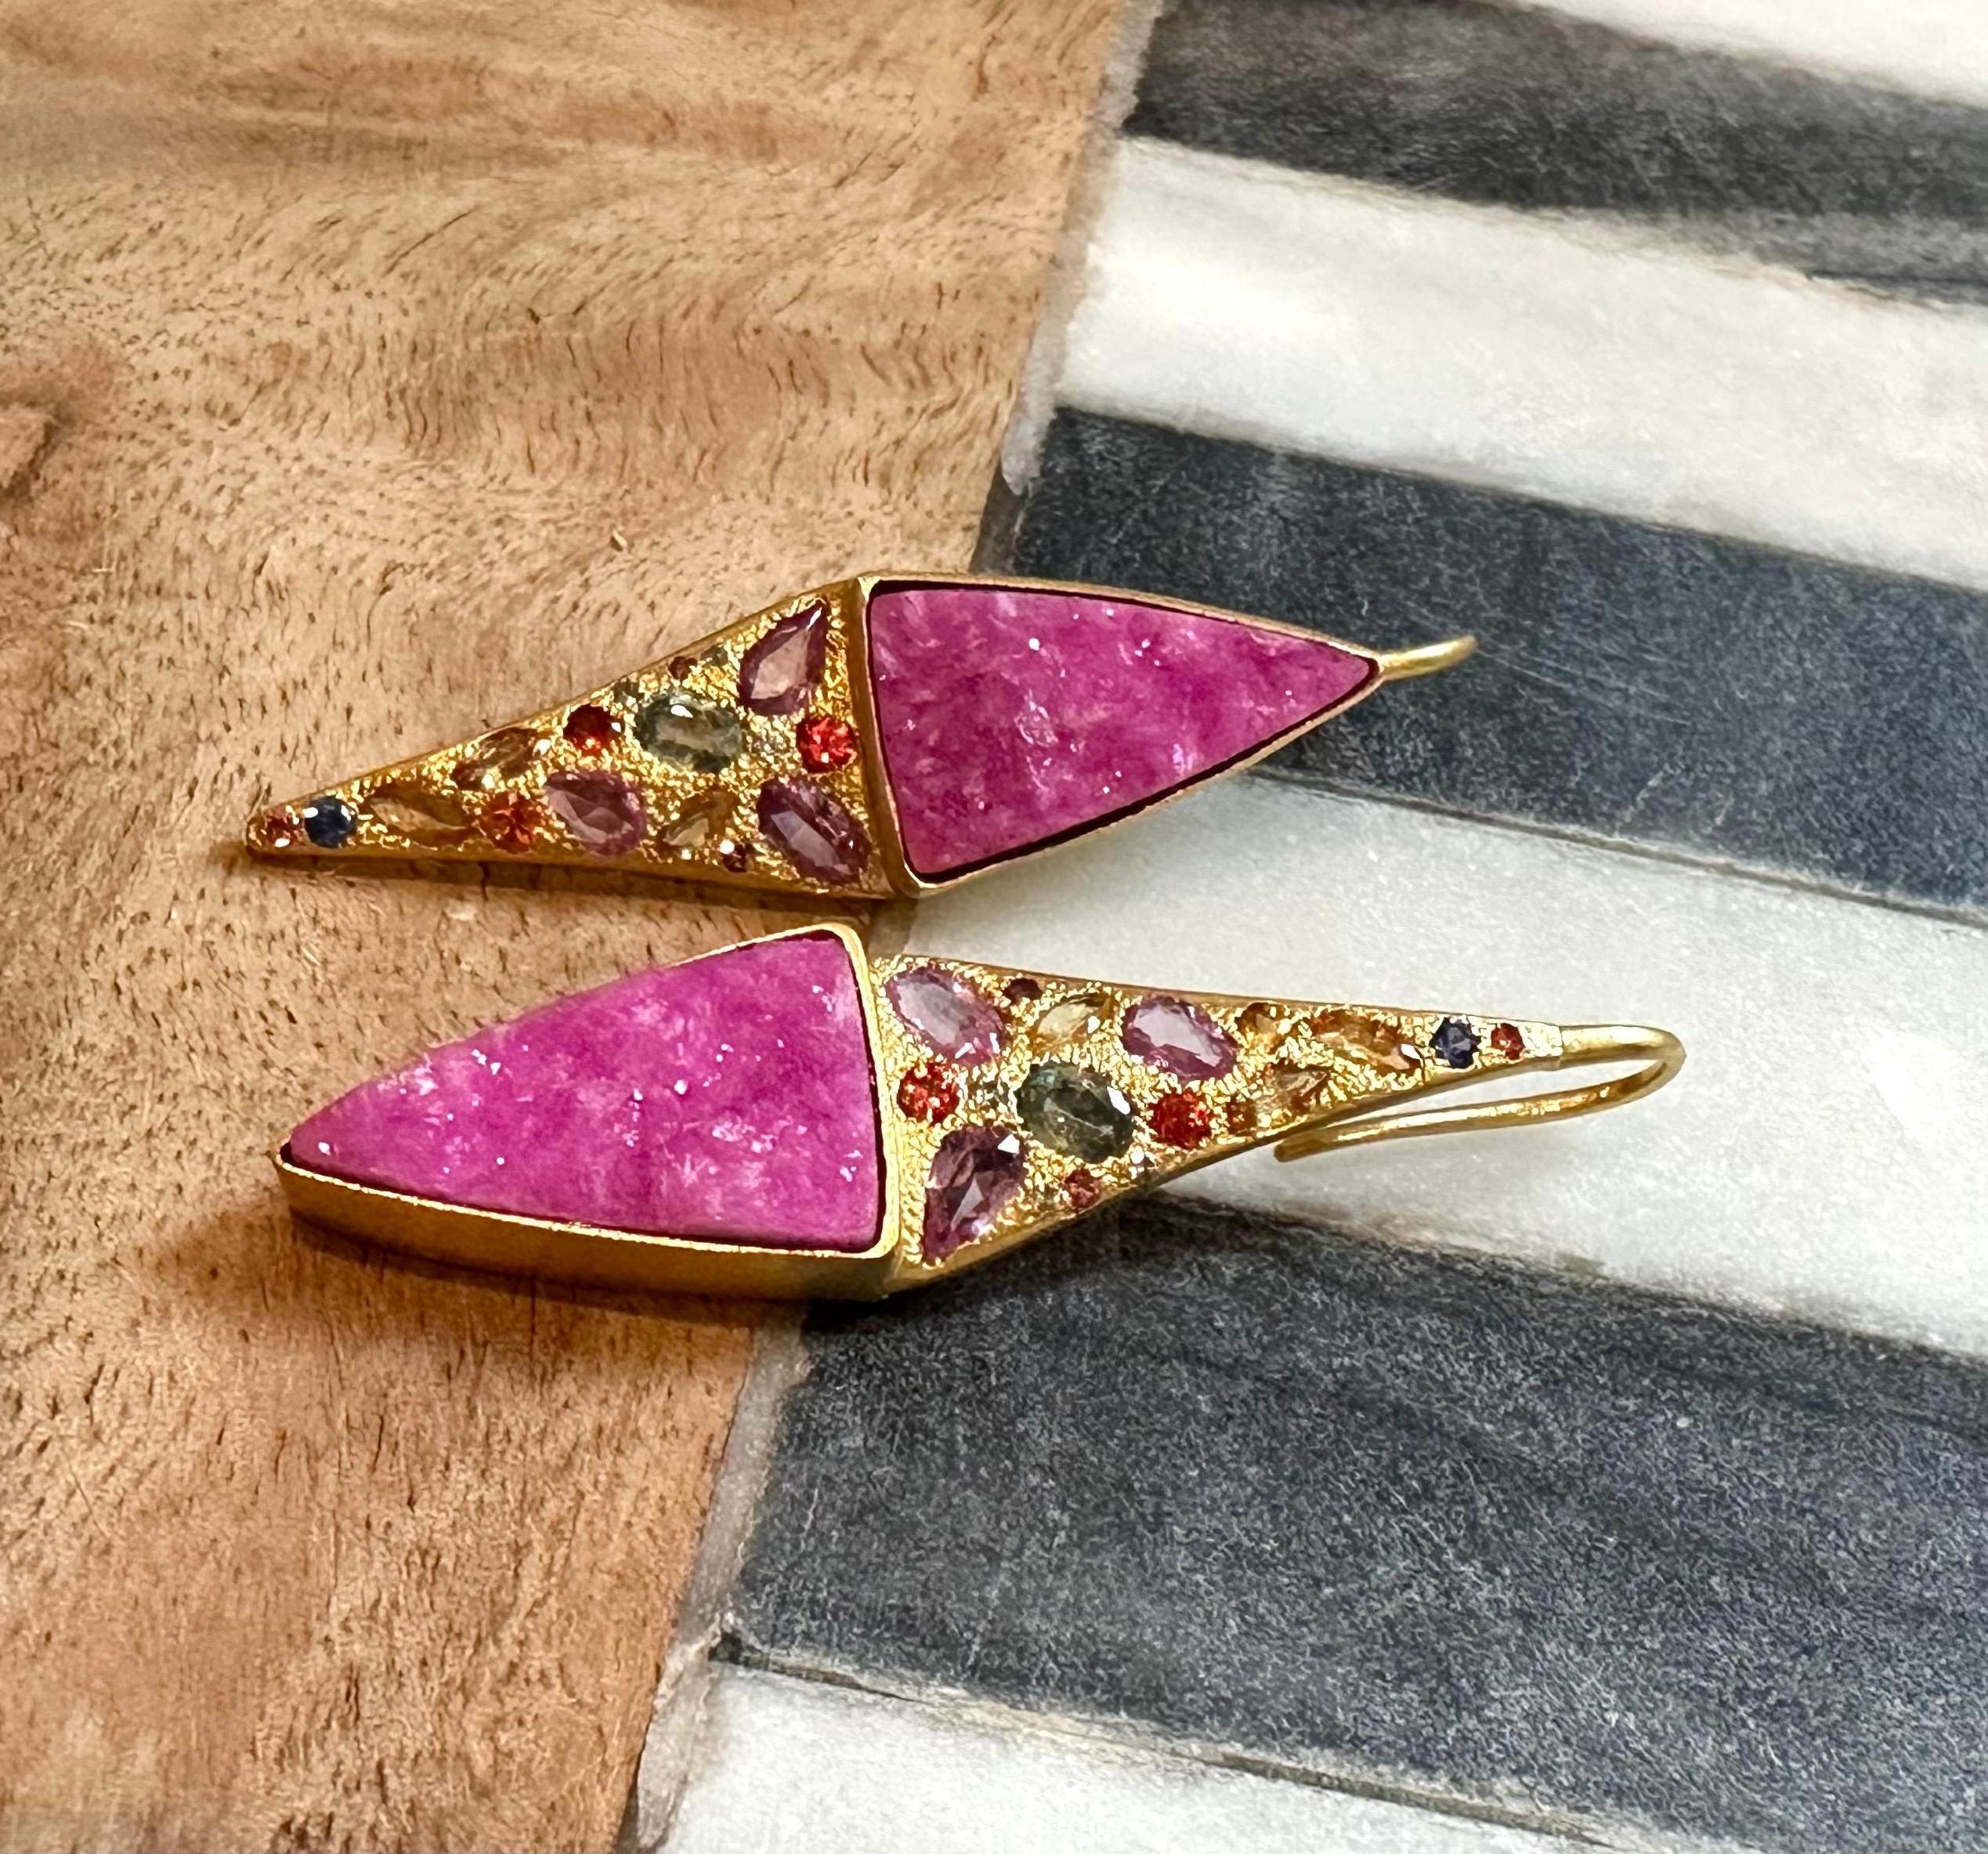 Multicolored Sapphires, Pink Quartz and 18kt Gold Earrings by Lauren Harper In New Condition For Sale In Winnetka, IL